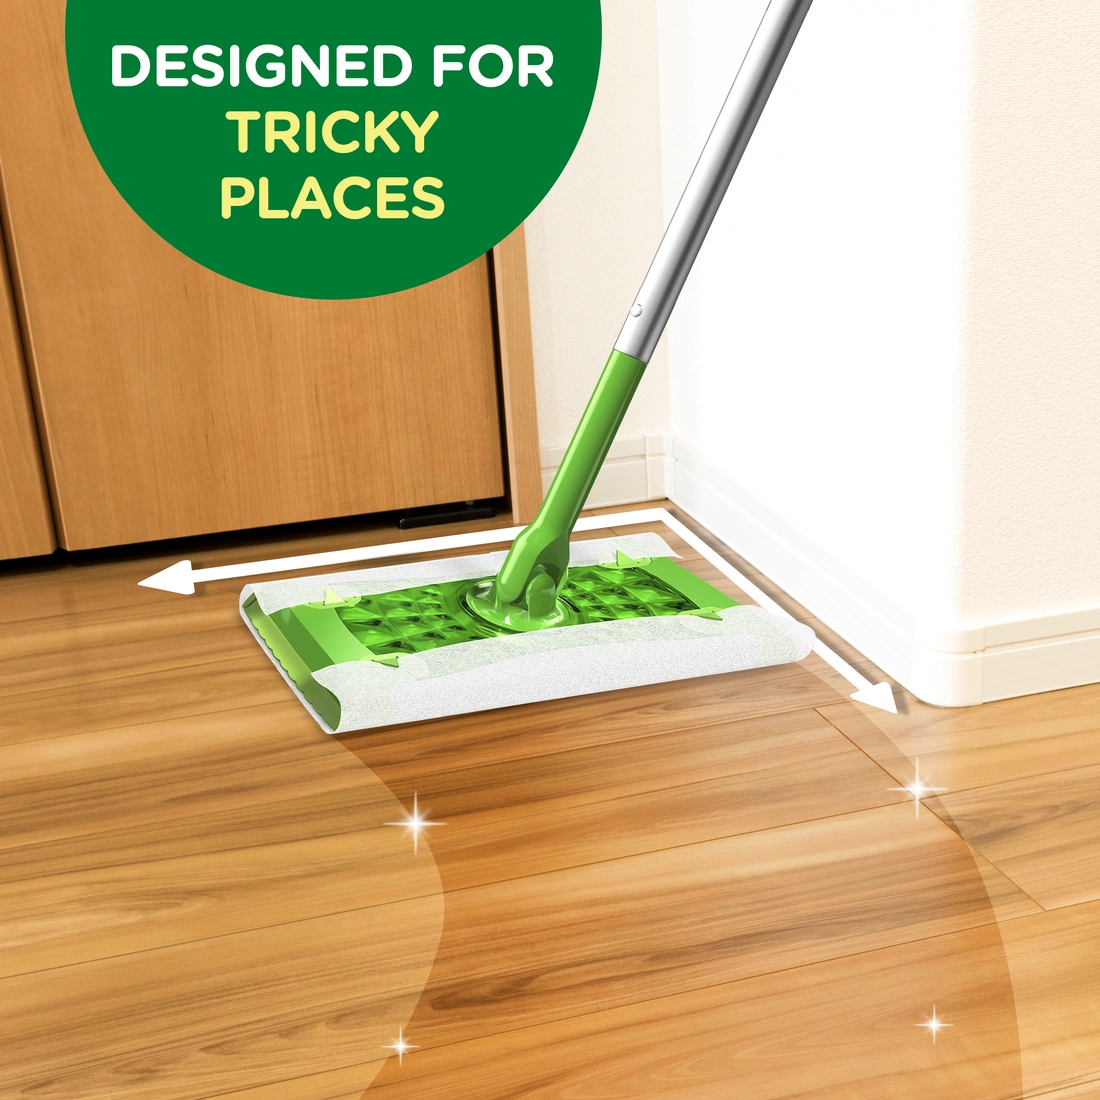 Swiffer® Sweeper™ Pet 2-in-1, Dry and Wet Multi-Surface Floor